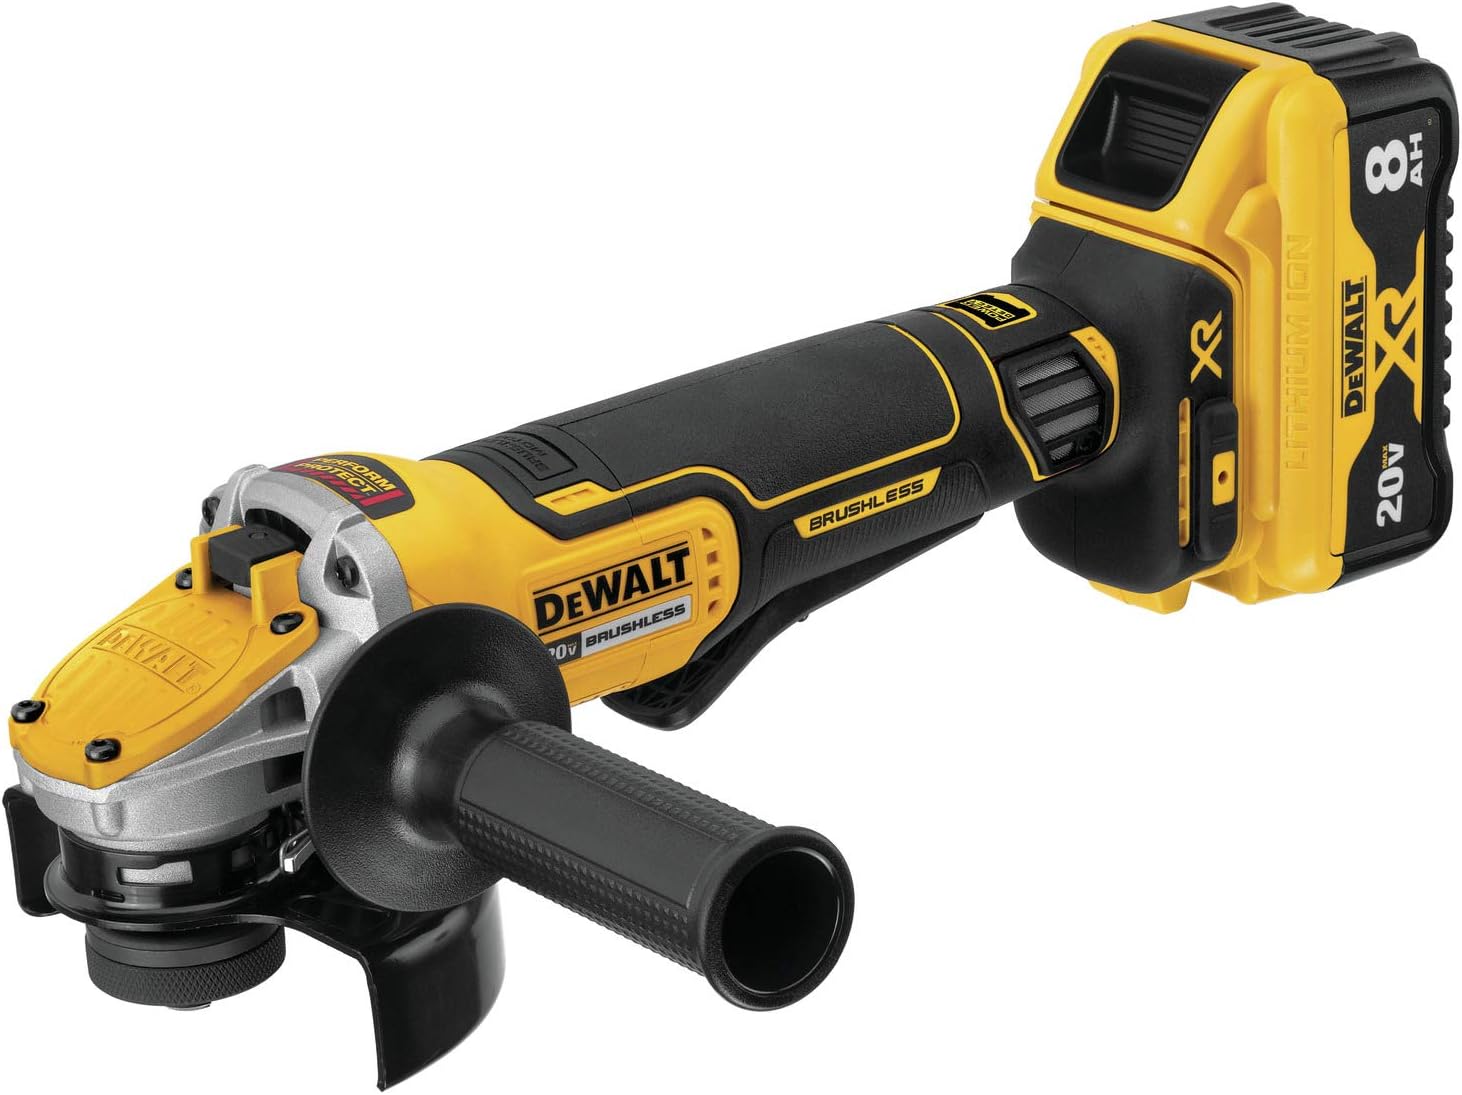 DEWALT 20V MAX* XR Angle Grinder, Trigger Switch, Power Detect Tool Technology Kit, 4-1/2-Inch to 5-Inch (DCG415W1), Grey,yellow,black